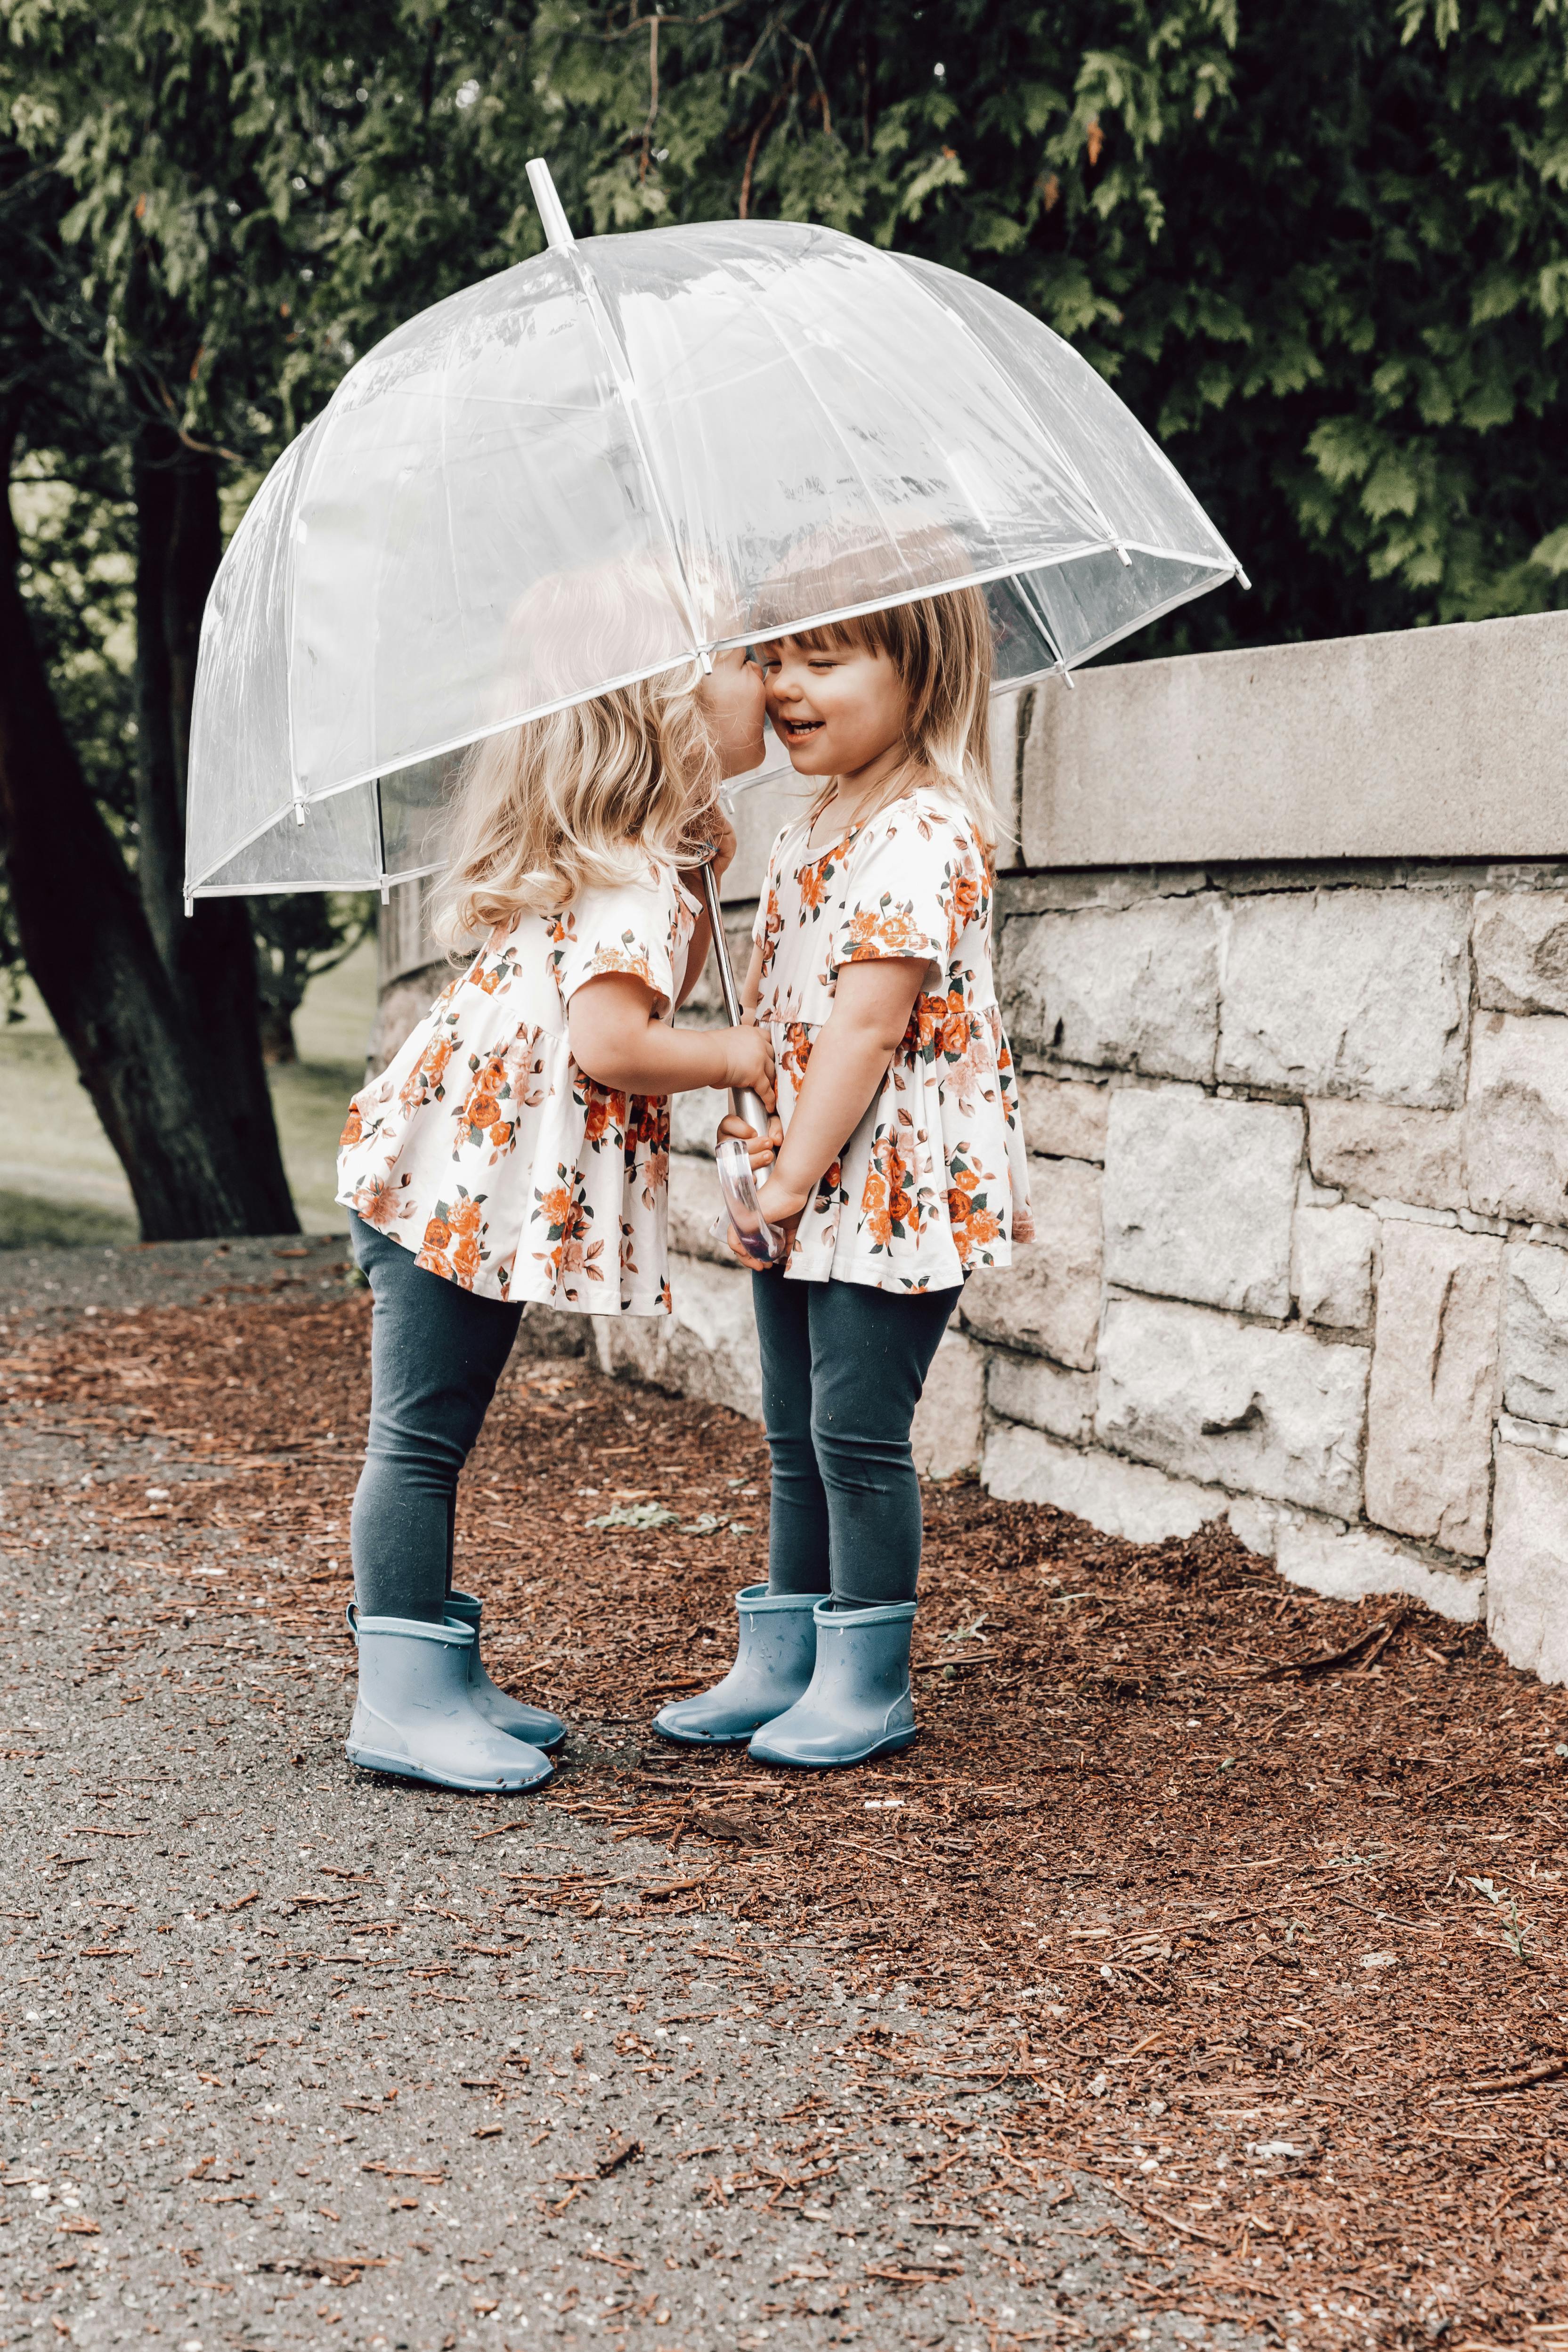 Two young girls holding a clear umbrella outdoors.